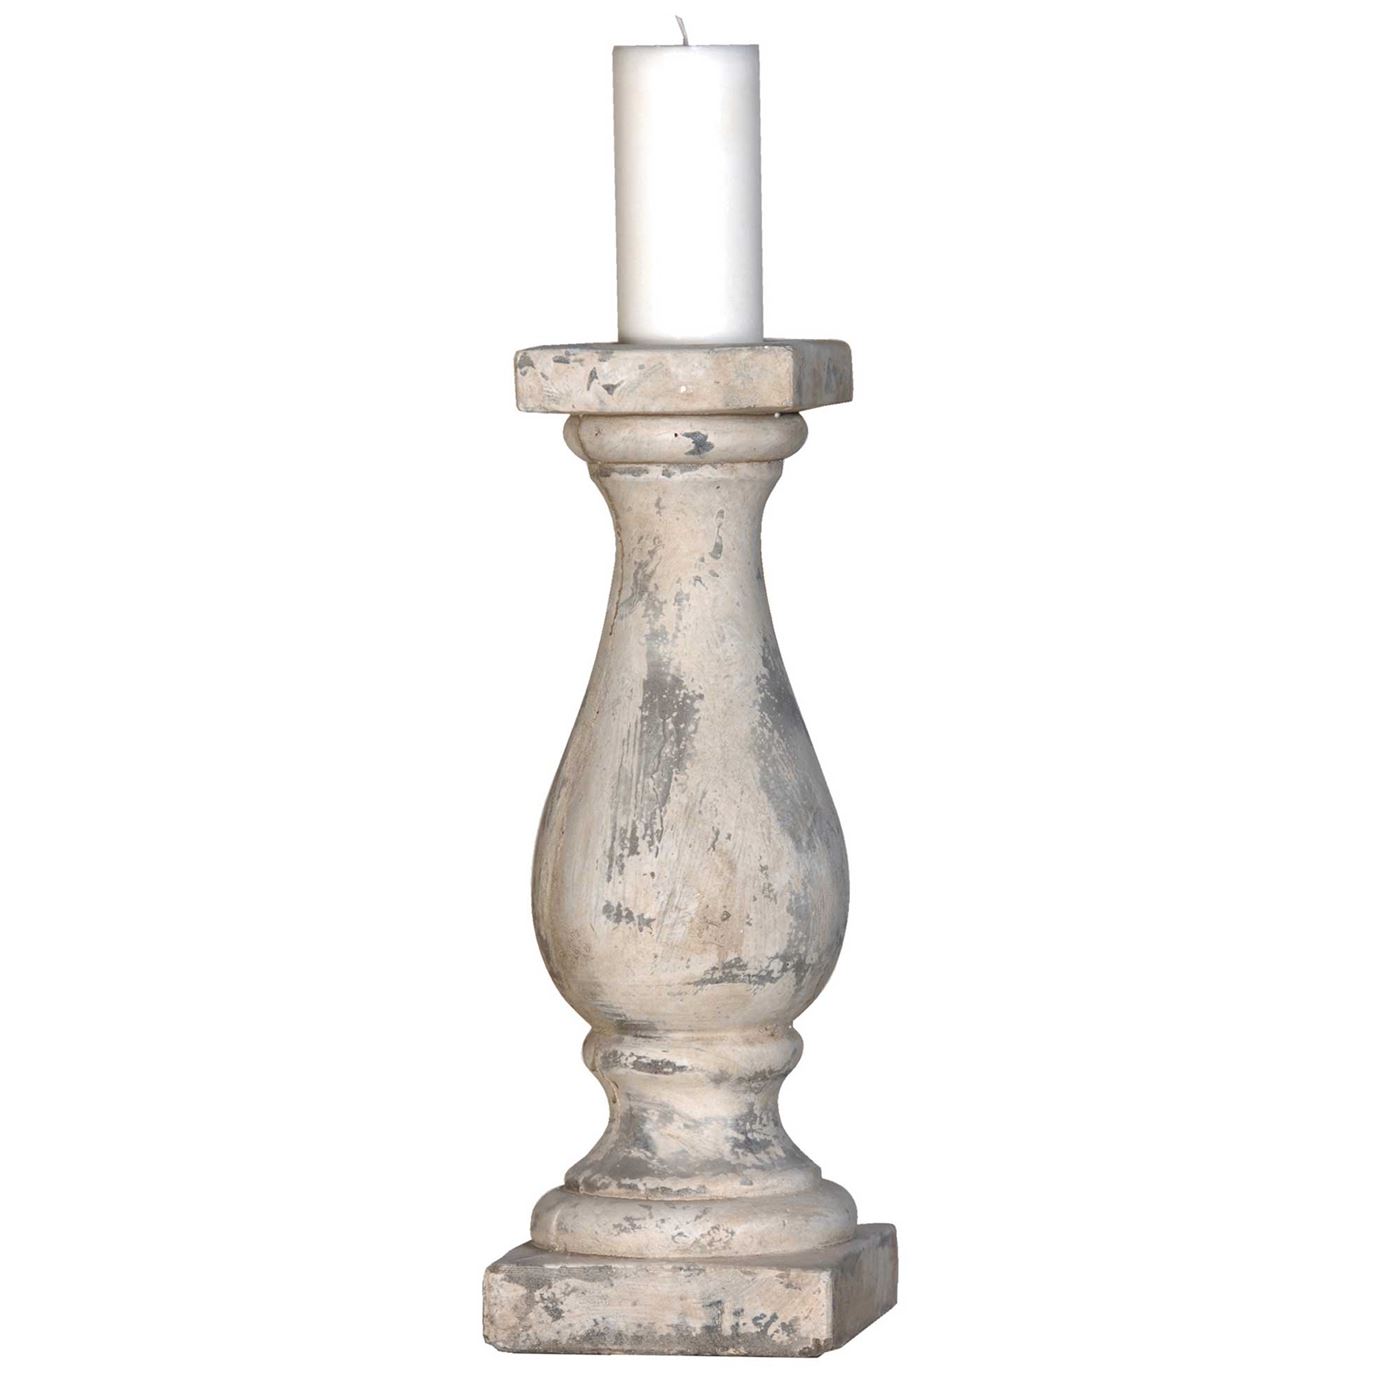 Large Distressed Stone Effect Candle Holder, Neutral Ceramic | Barker & Stonehouse